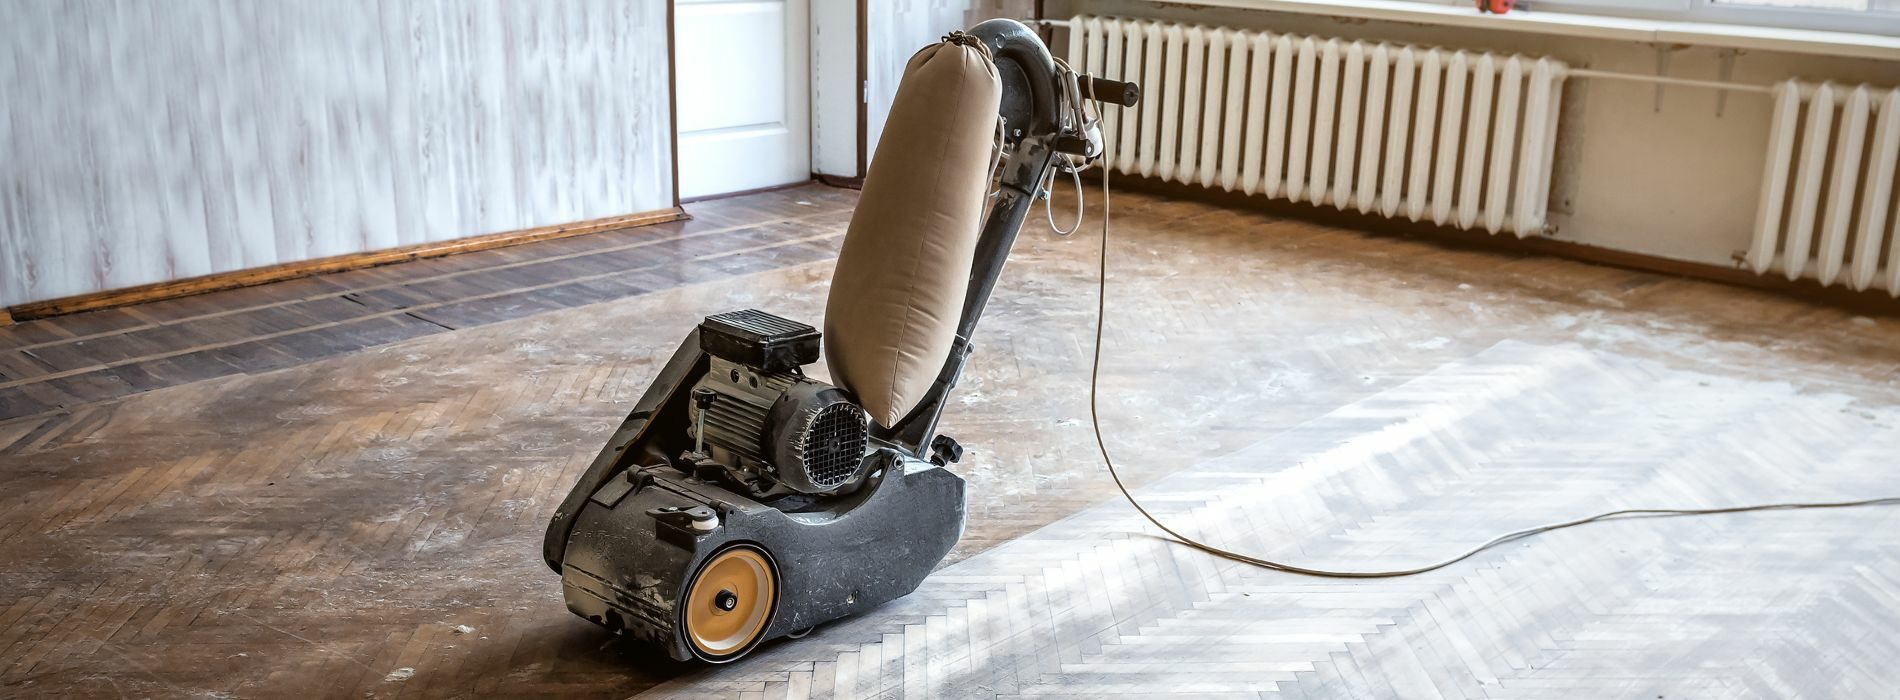 Reliable and safe drum sander with 1.5 kW power and 200 mm dimension, perfect for sanding hardwood floors in Mortlake, SW14. Operating at 240 V and 50 Hz, this efficient machine ensures high-quality sanding results.